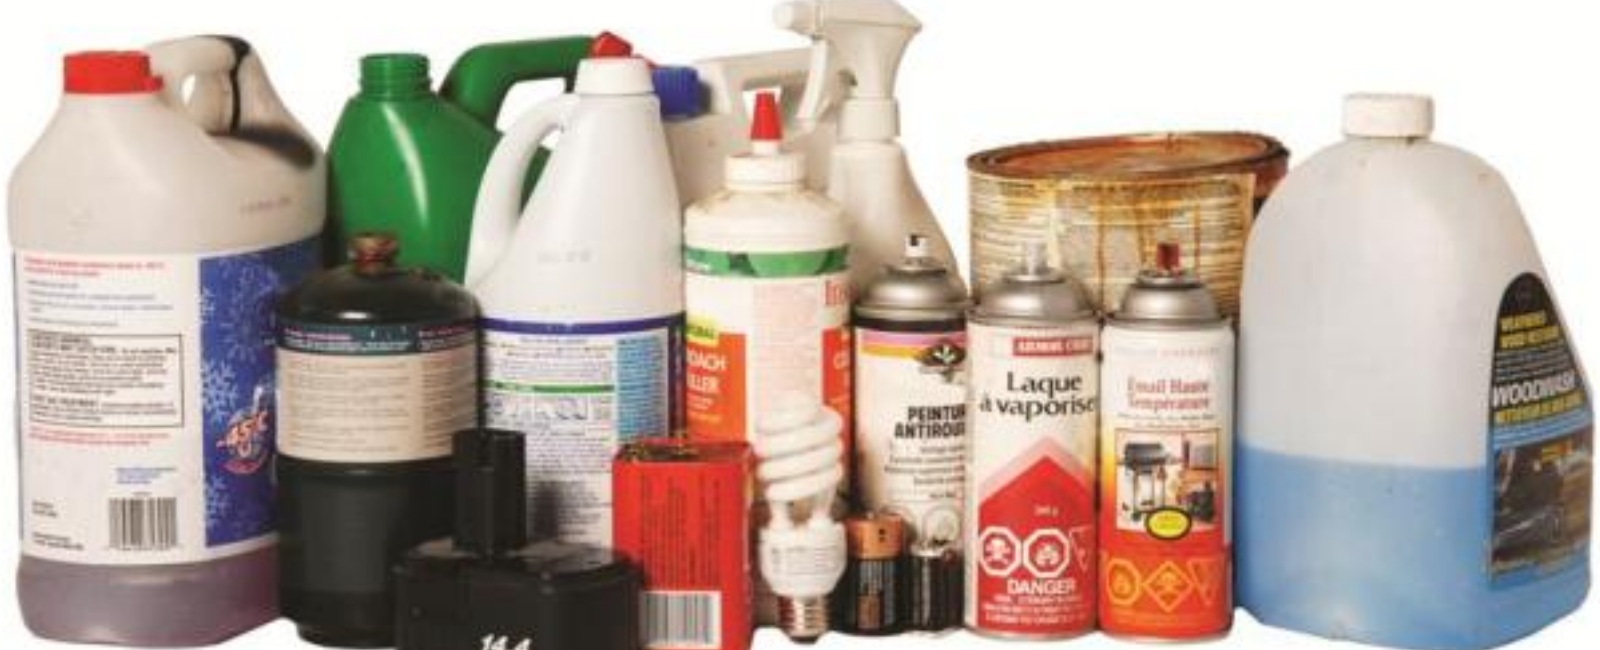 Photo of household hazardous waste items such as chemicals and batteries